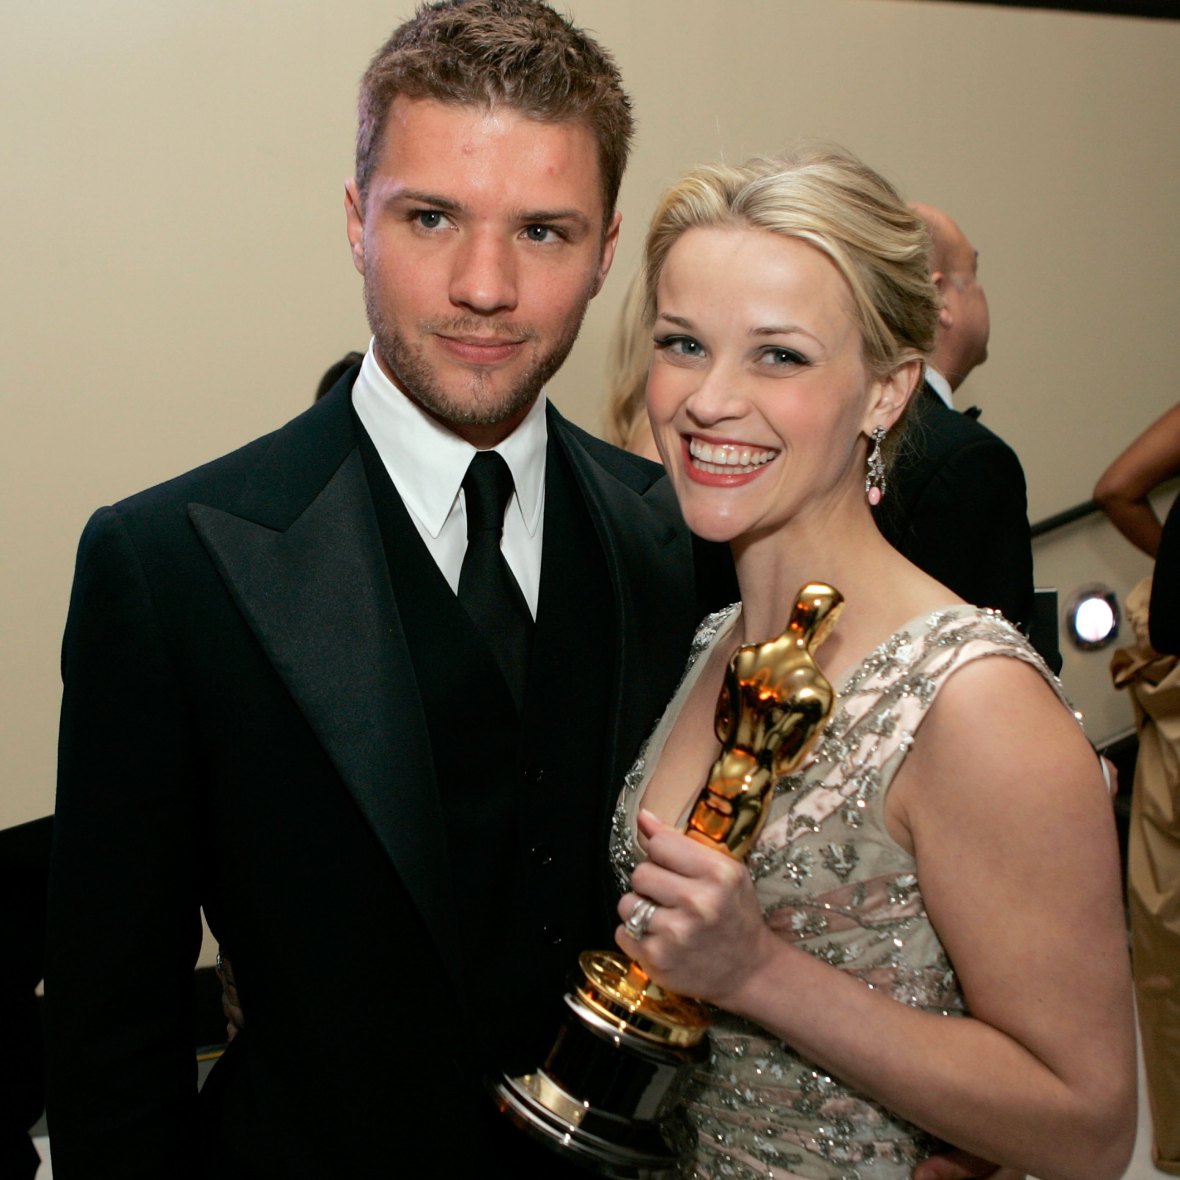 Reese Witherspoon Seemingly Disses Ex Husband Ryan Phillippe In New Interview